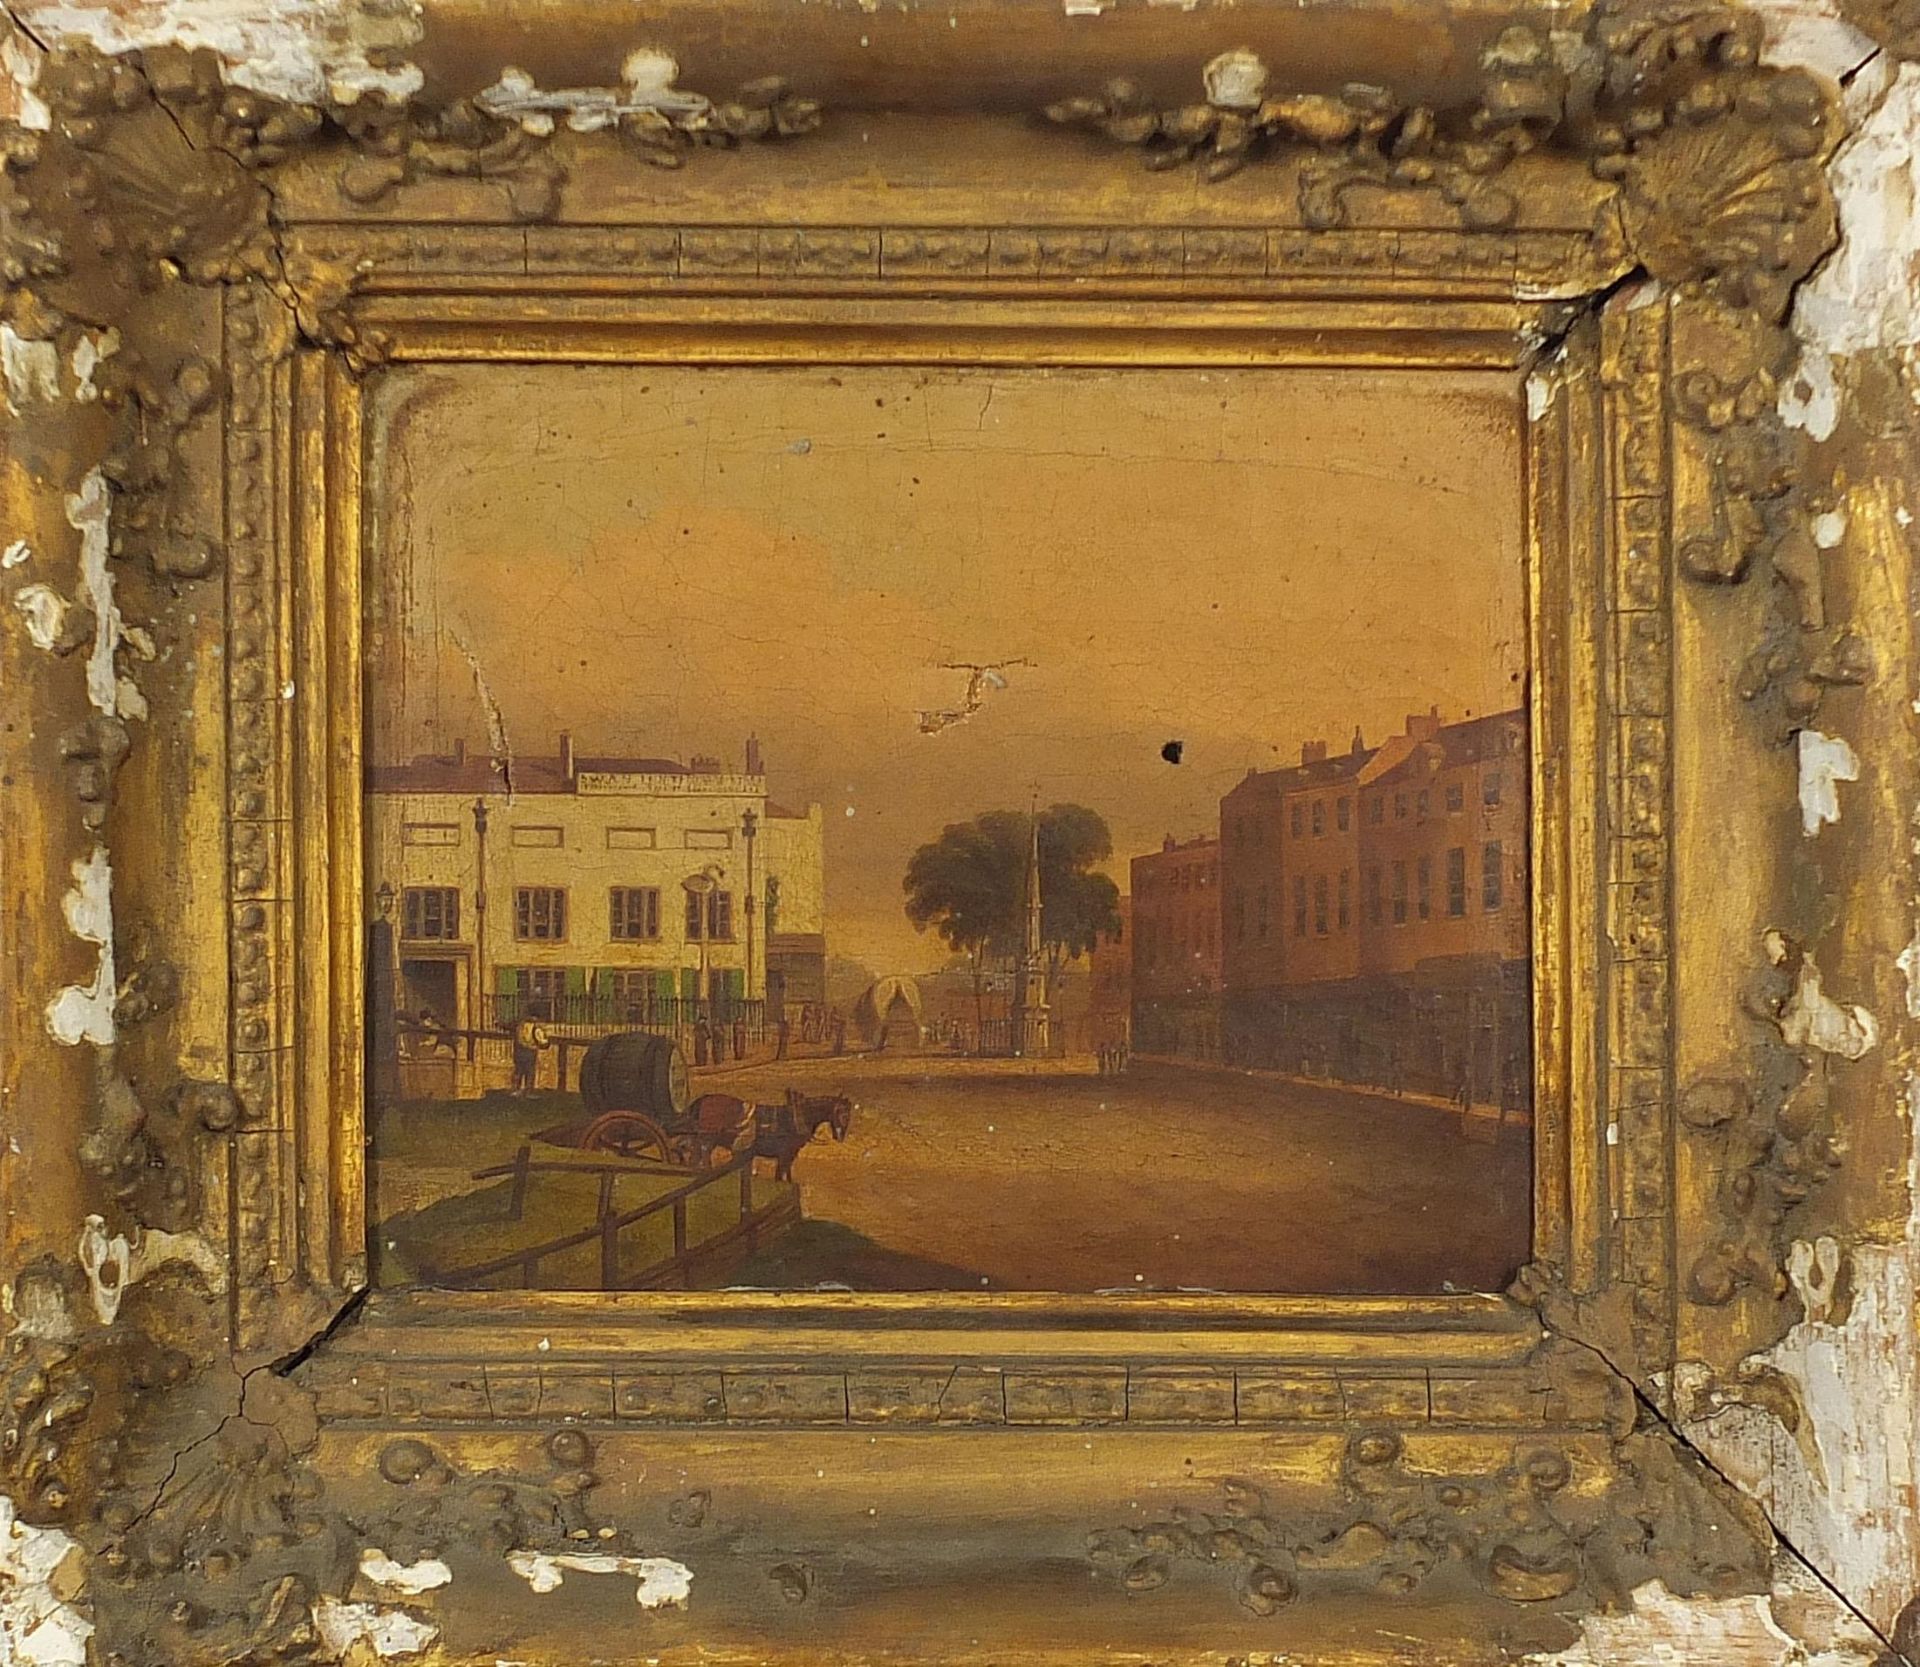 Town scene with figures and horse drawn cart, 19th century American school oil on canvas, mounted - Image 2 of 4